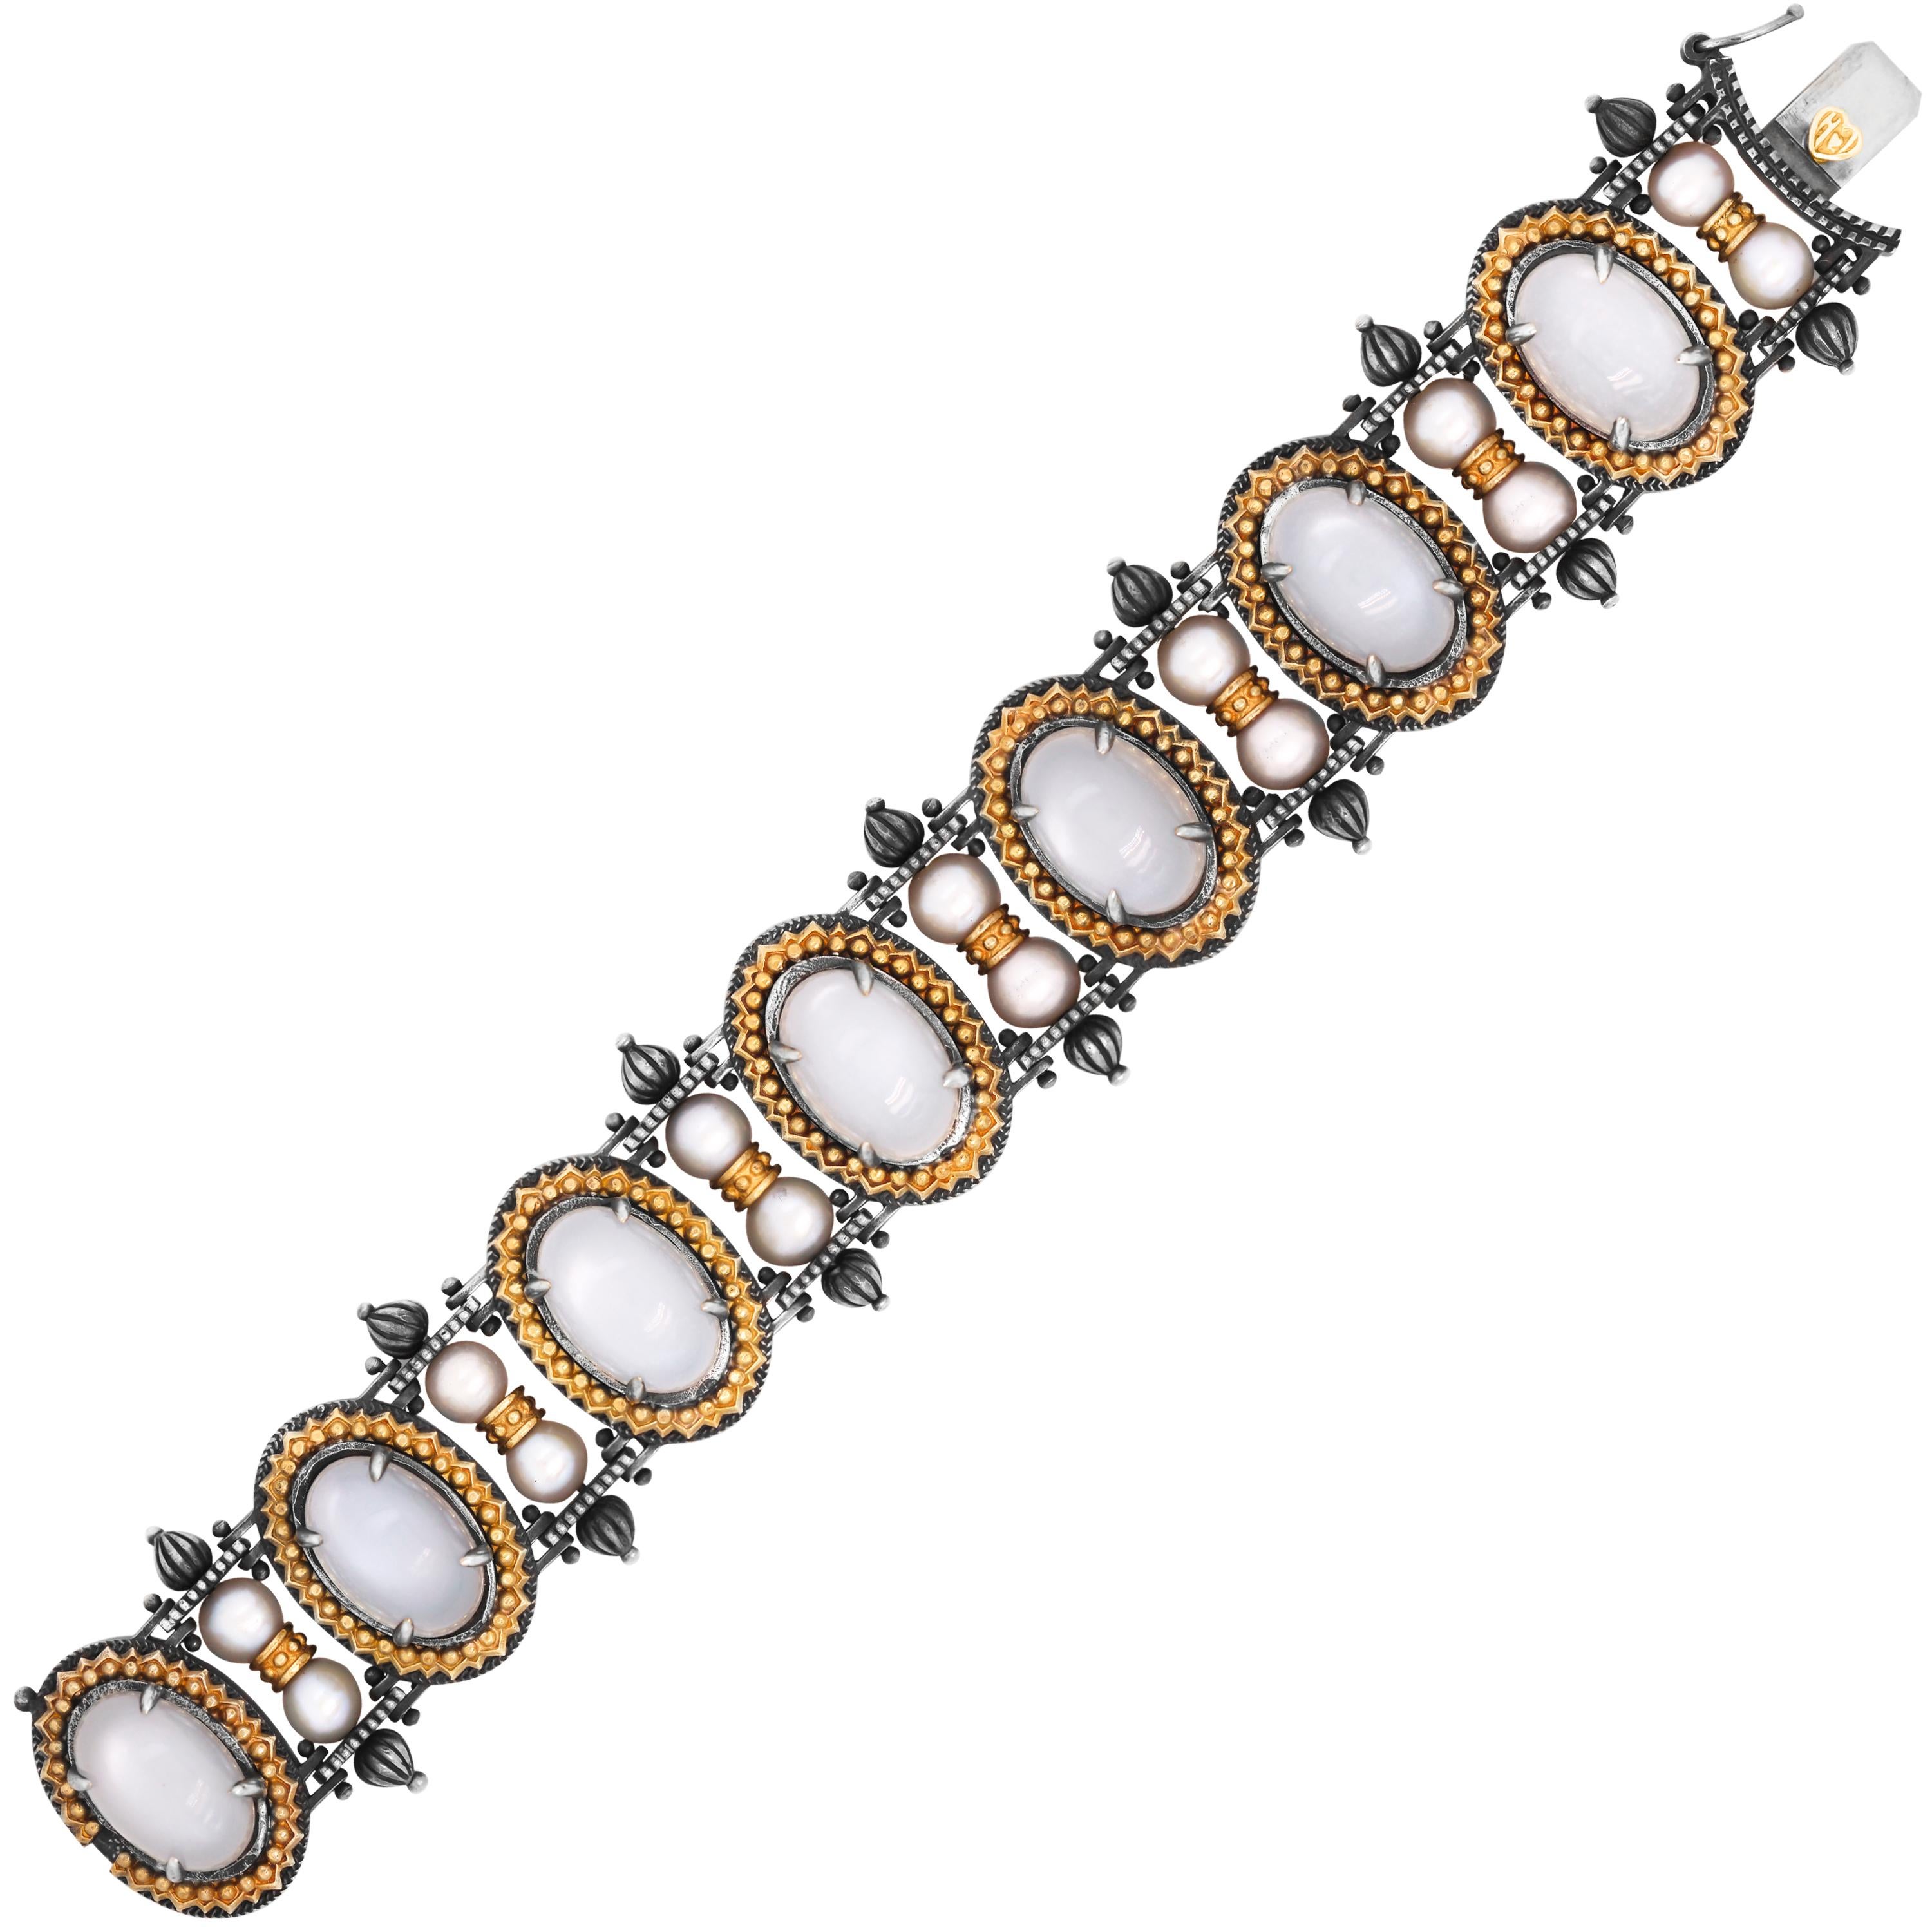 Stambolian Oval Grey Moonstone Round Pearl Aged Silver 18K Gold Retro Bracelet

From the Beginnings collection by Stambolian. This bracelet features Grey moonstones with two pearls in between each section

Apprx. 53 carat Grey moonstones

7 inches